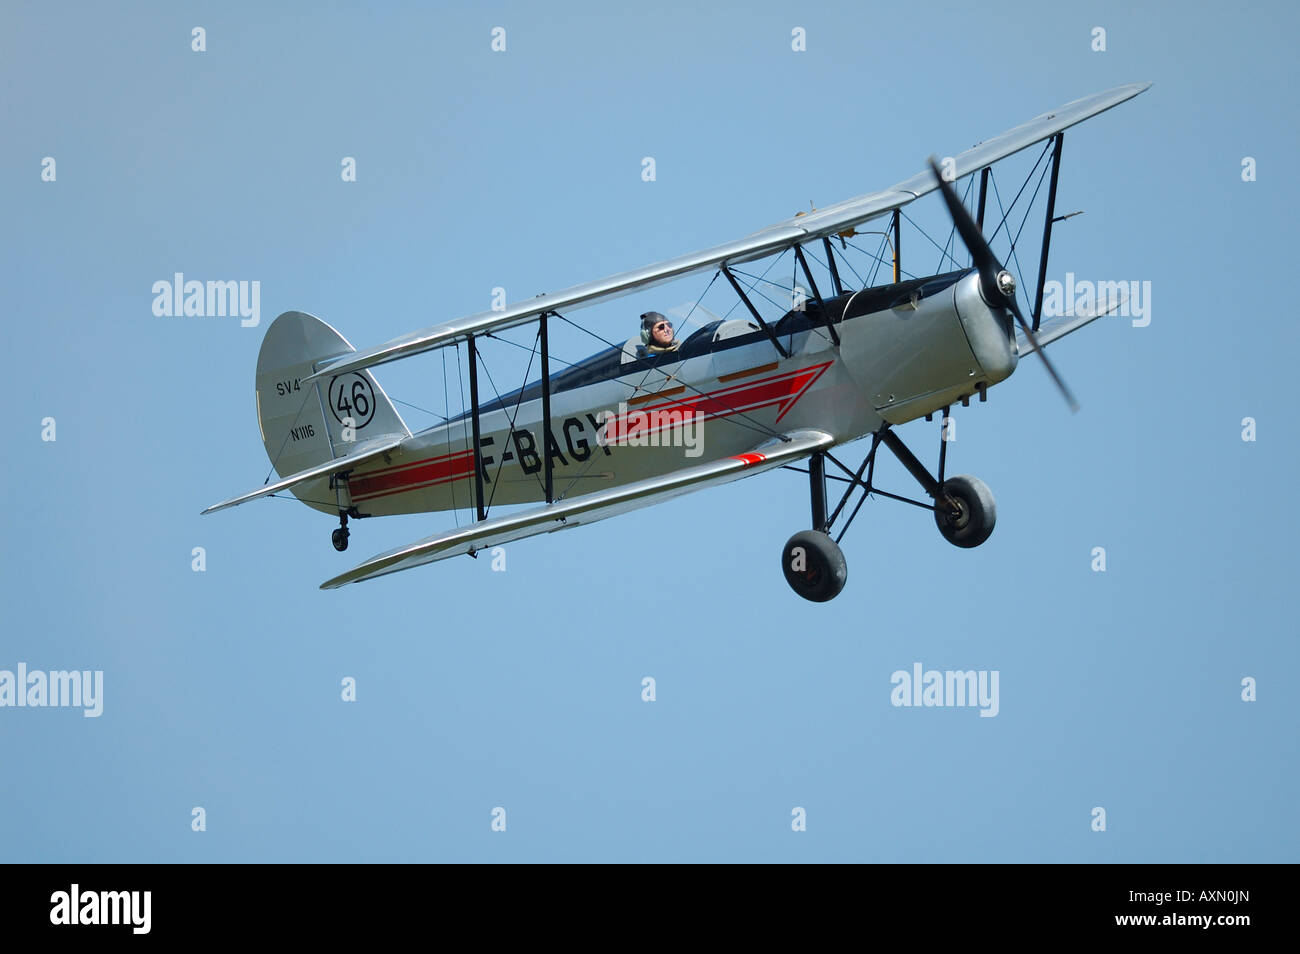 Old french trainer biplane Stampe SV-4a, french vintage air show, La Ferte Alais, France Stock Photo